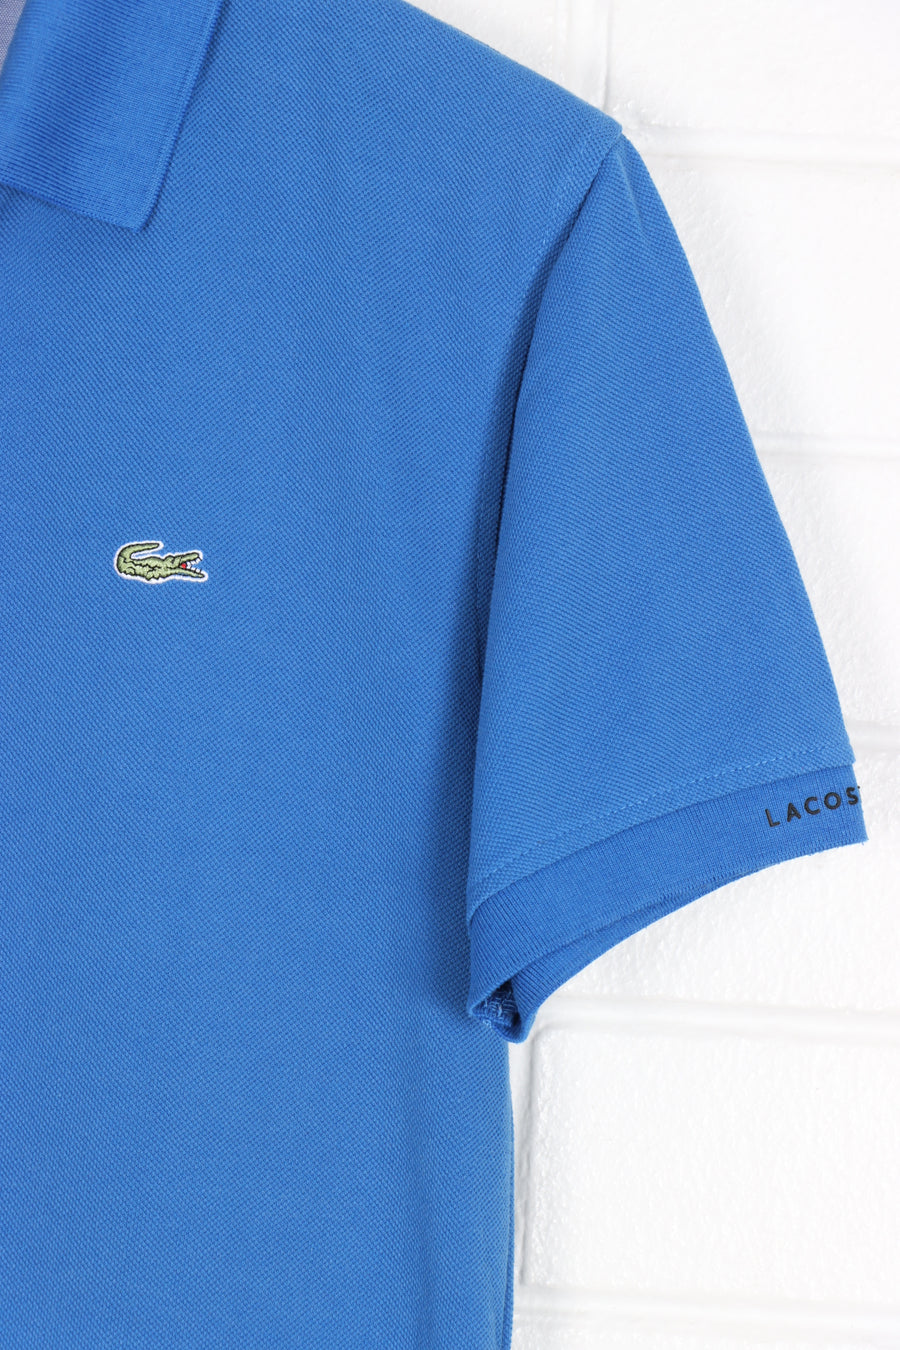 LACOSTE Blue Classic Embroidered Shirt French Made (M)